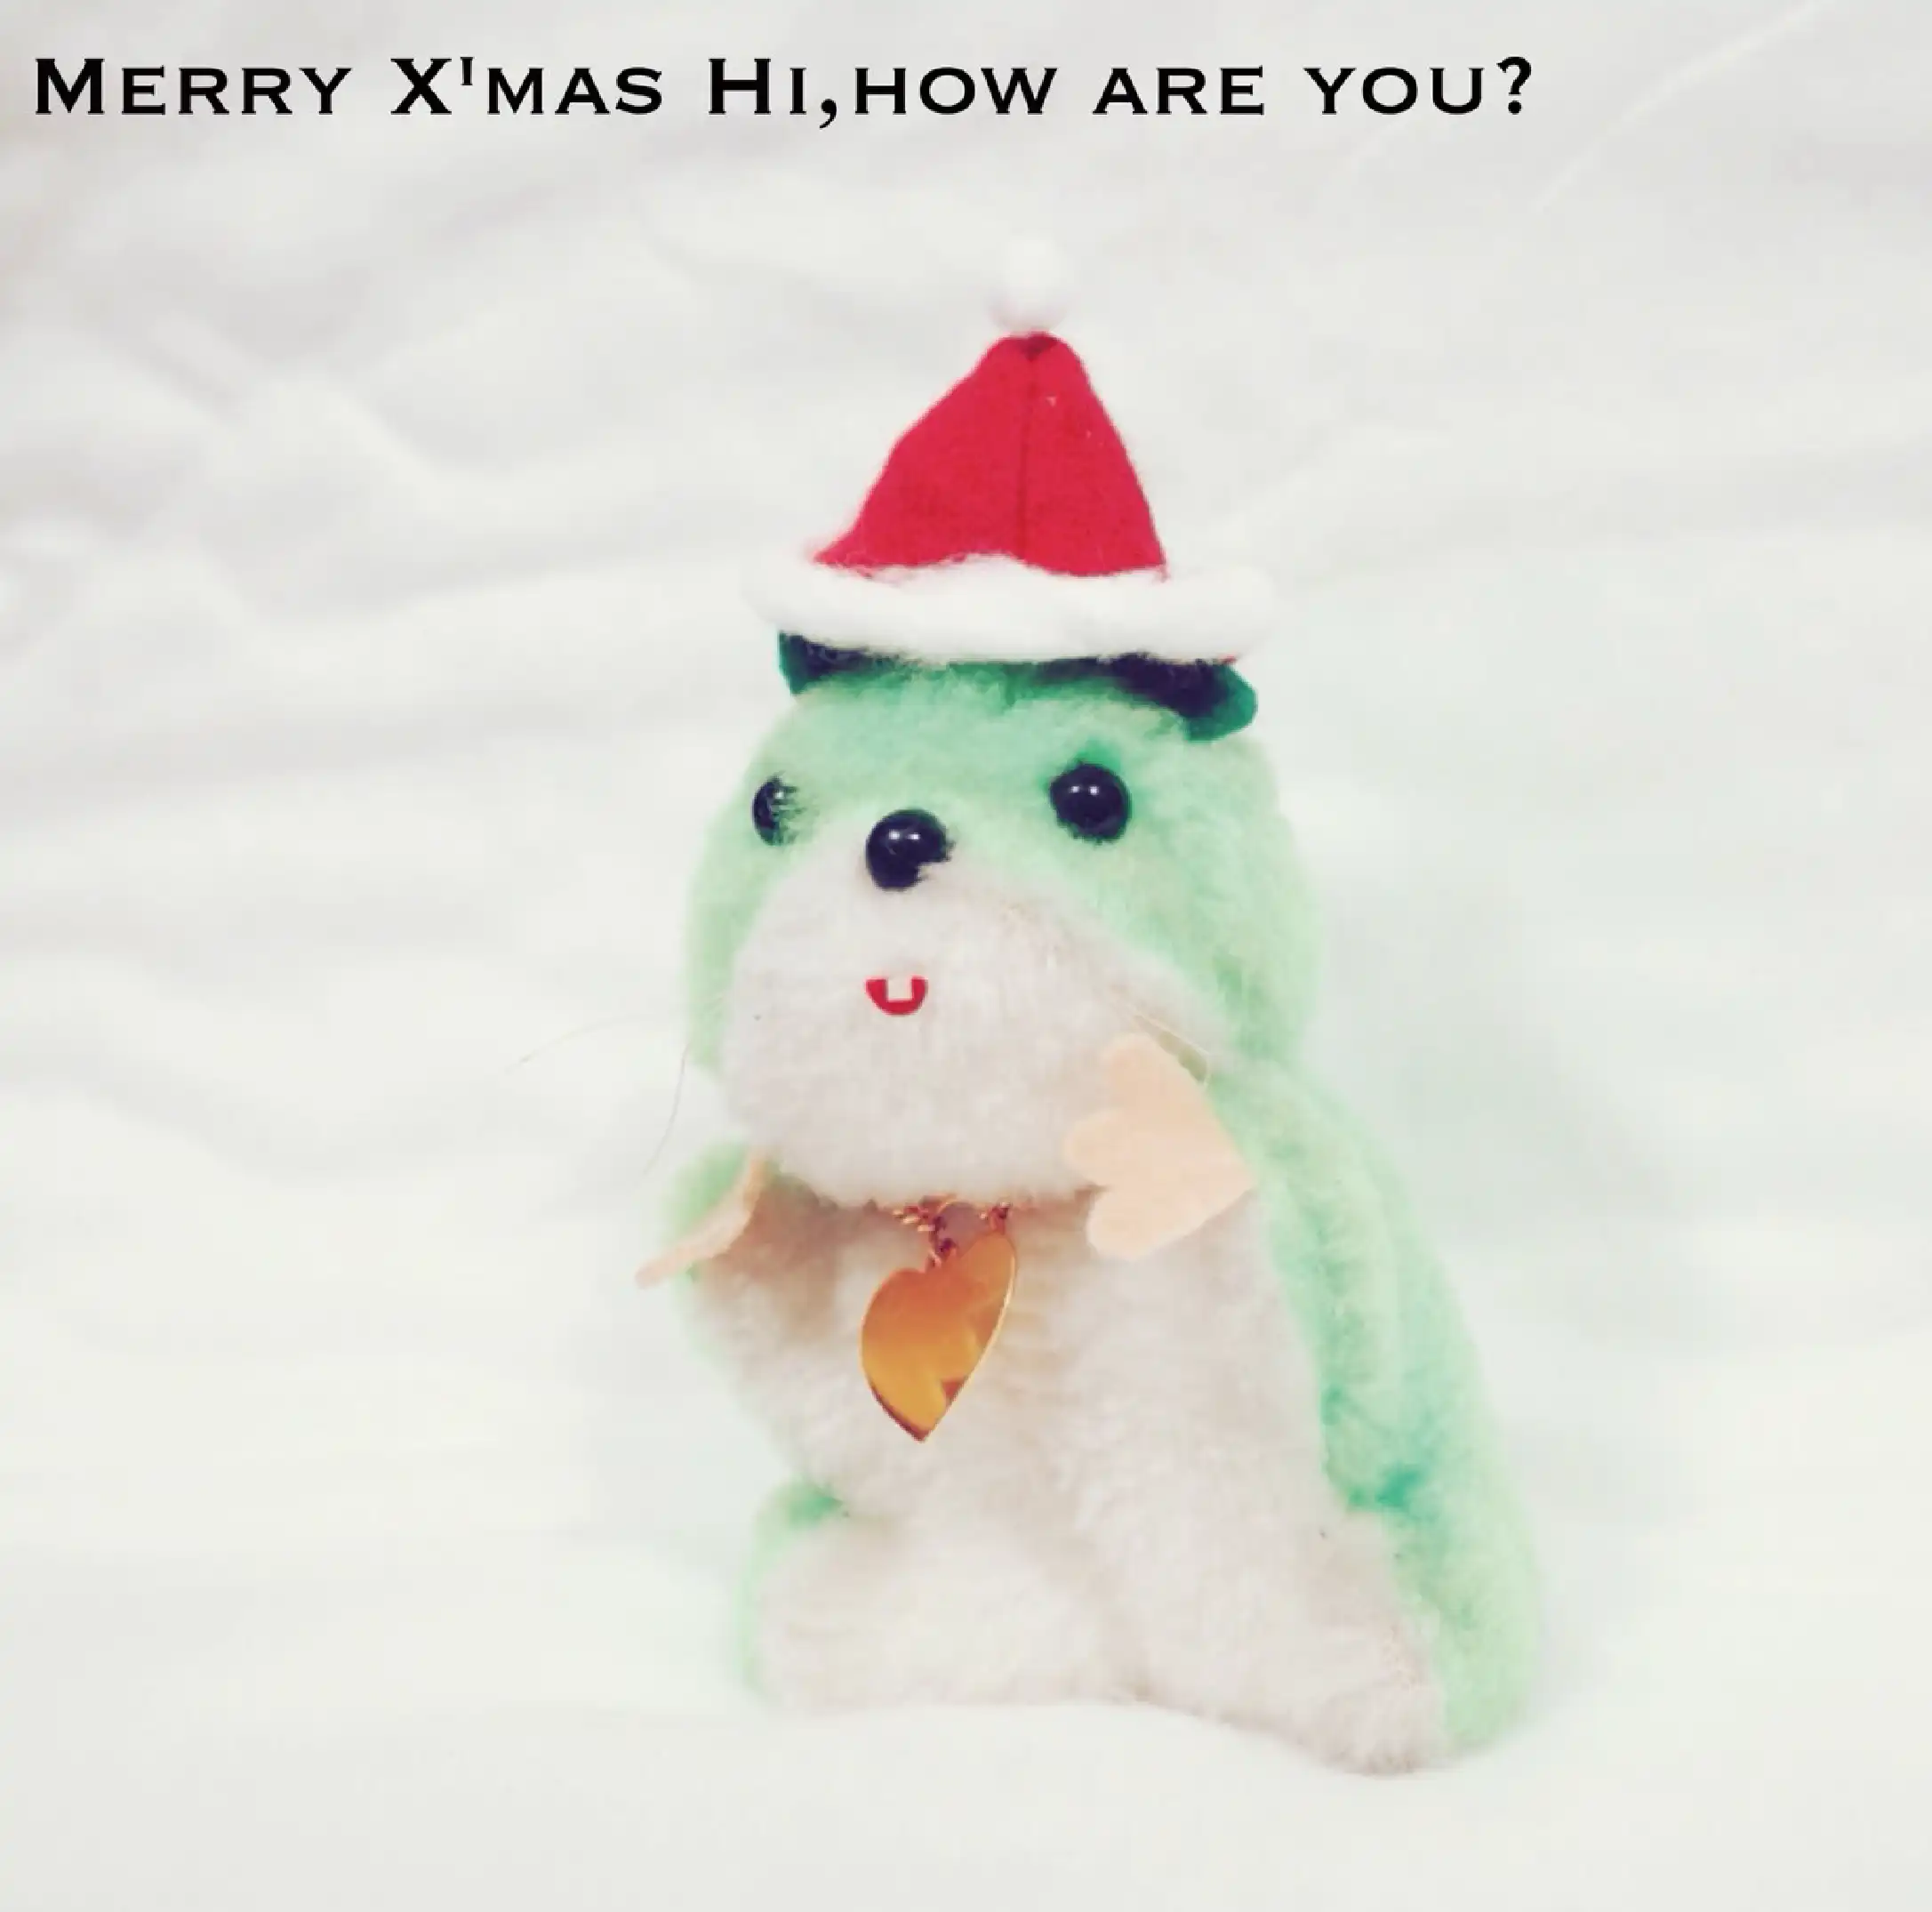 HI,HOW ARE YOU? / MERRY XMAS, HI,HOW ARE YOU?